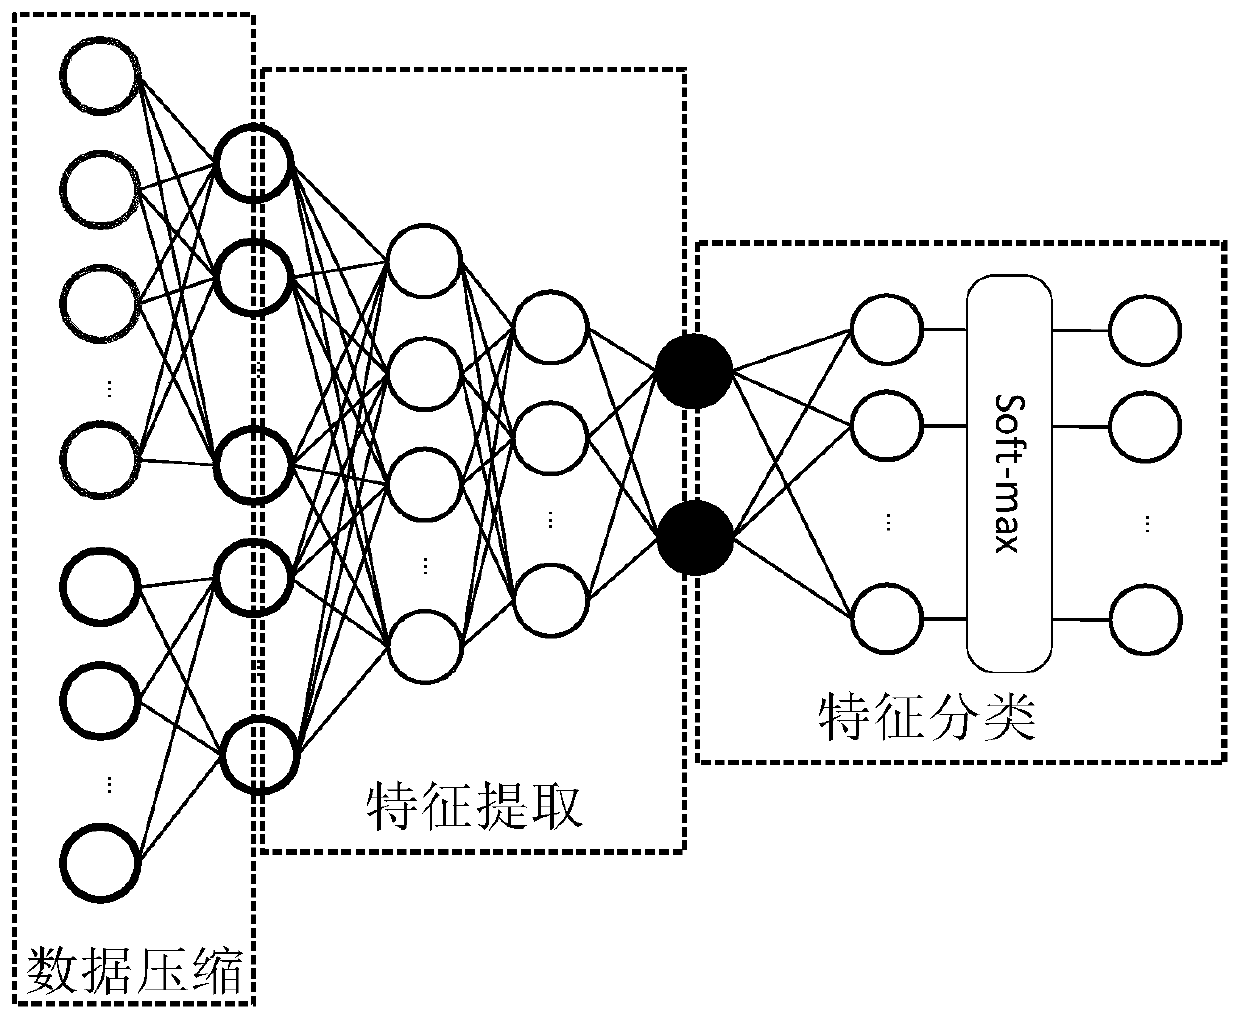 Motor fault diagnosis method for deep learning network of data fusion